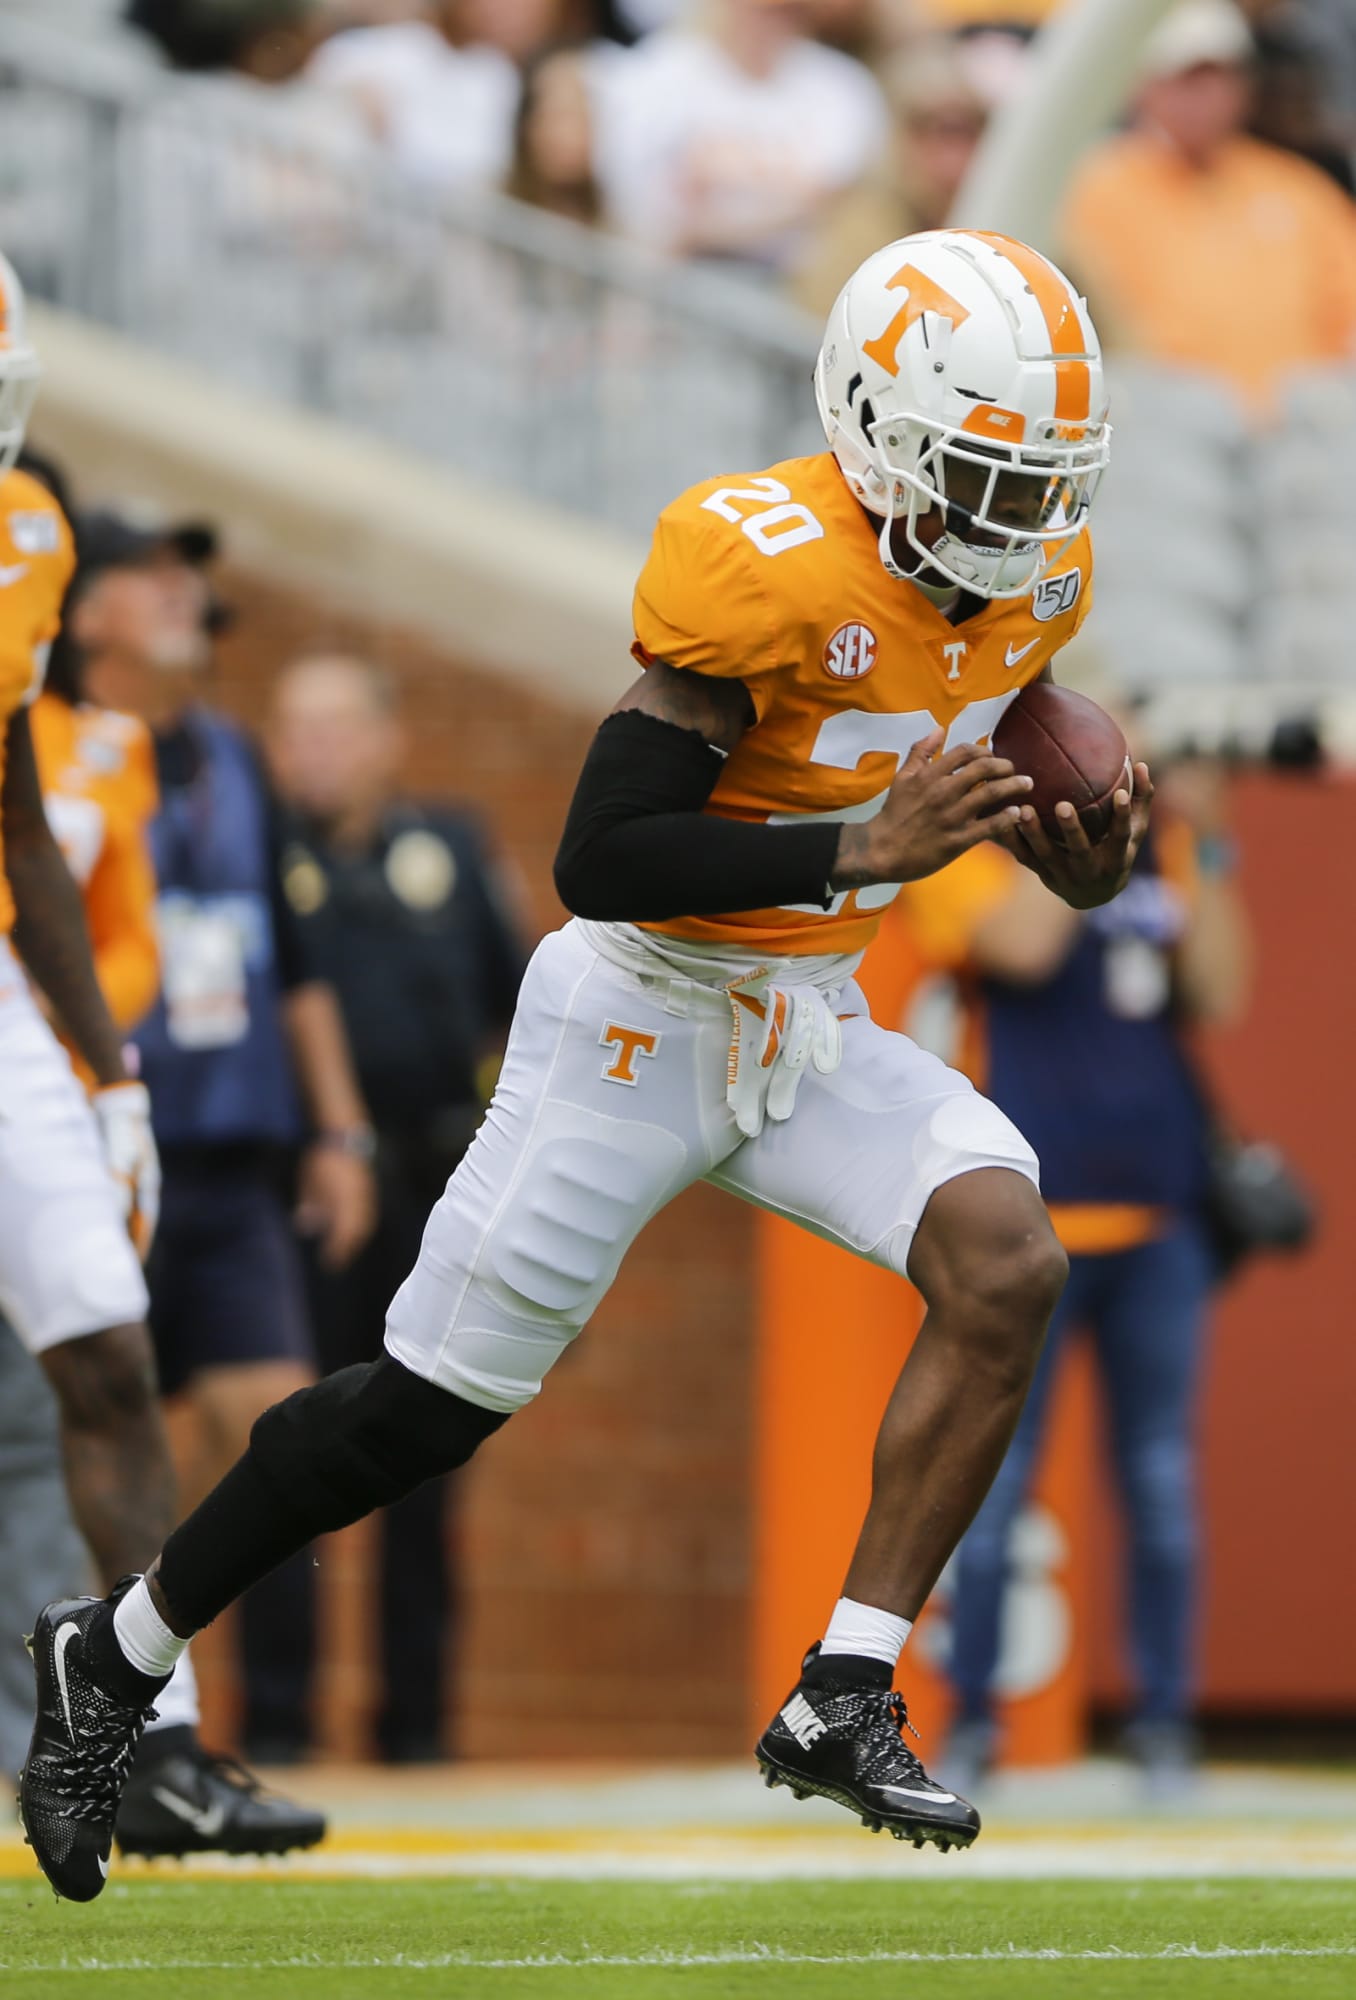 Tennessee football Vols players, commits recruiting prospects on Twitter